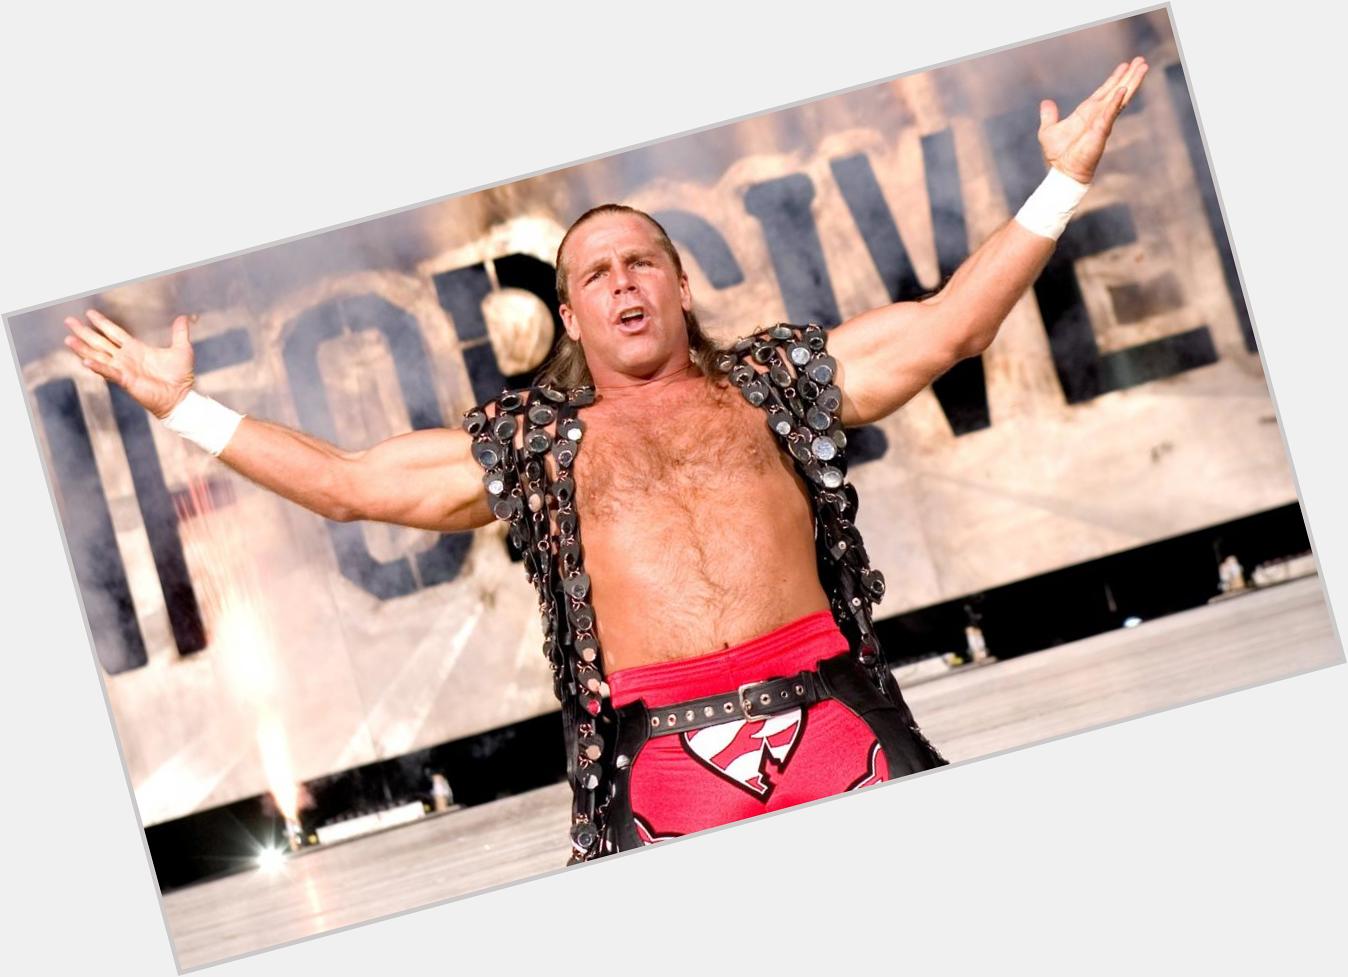 Happy 55th Birthday to my personal favourite of all time, Shawn Michaels. 